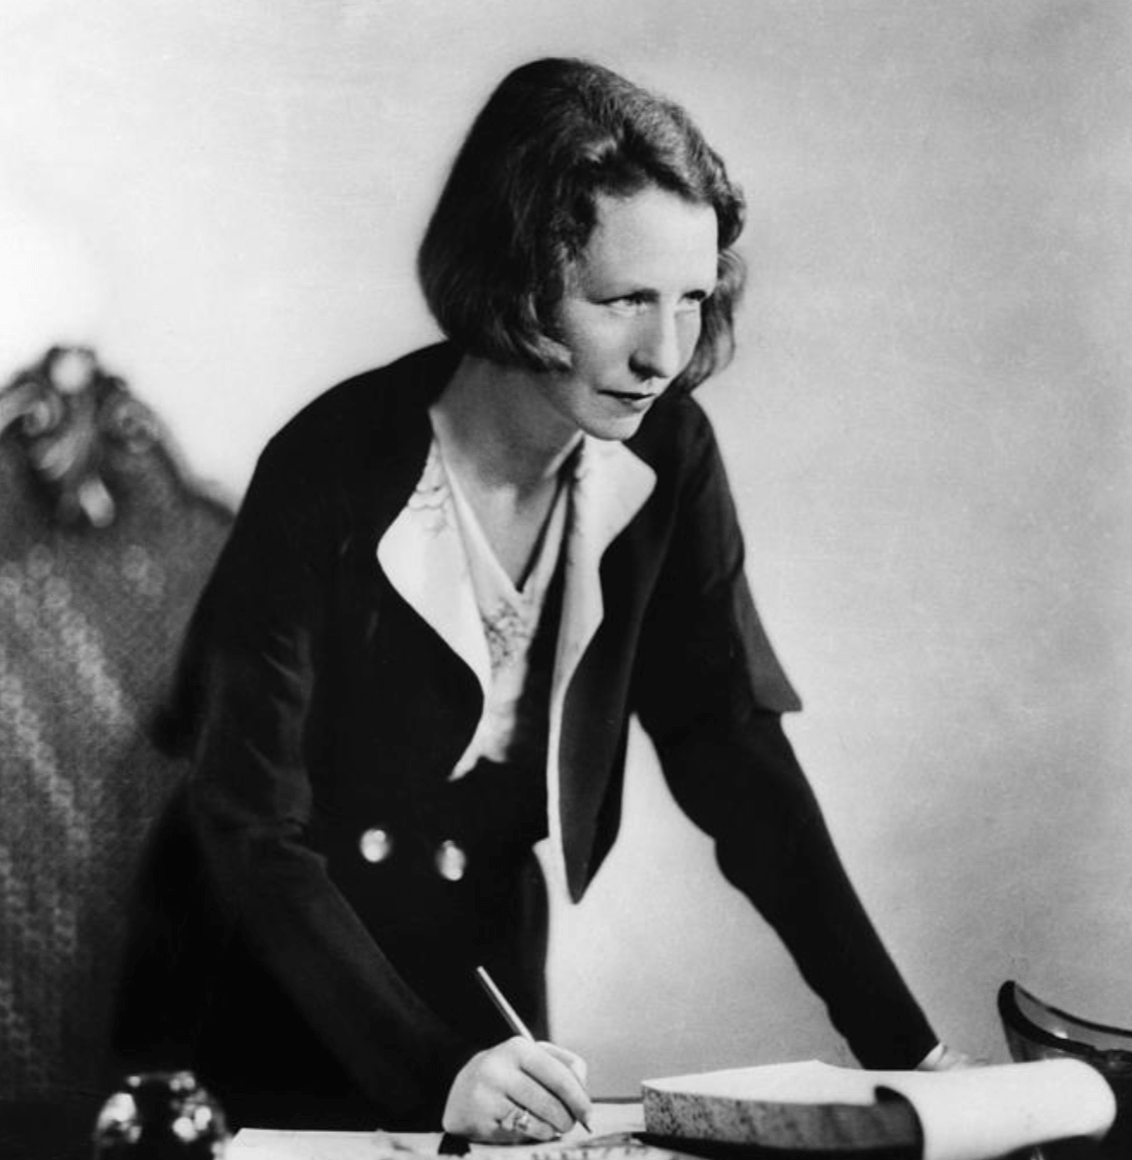 travel by edna st. vincent millay